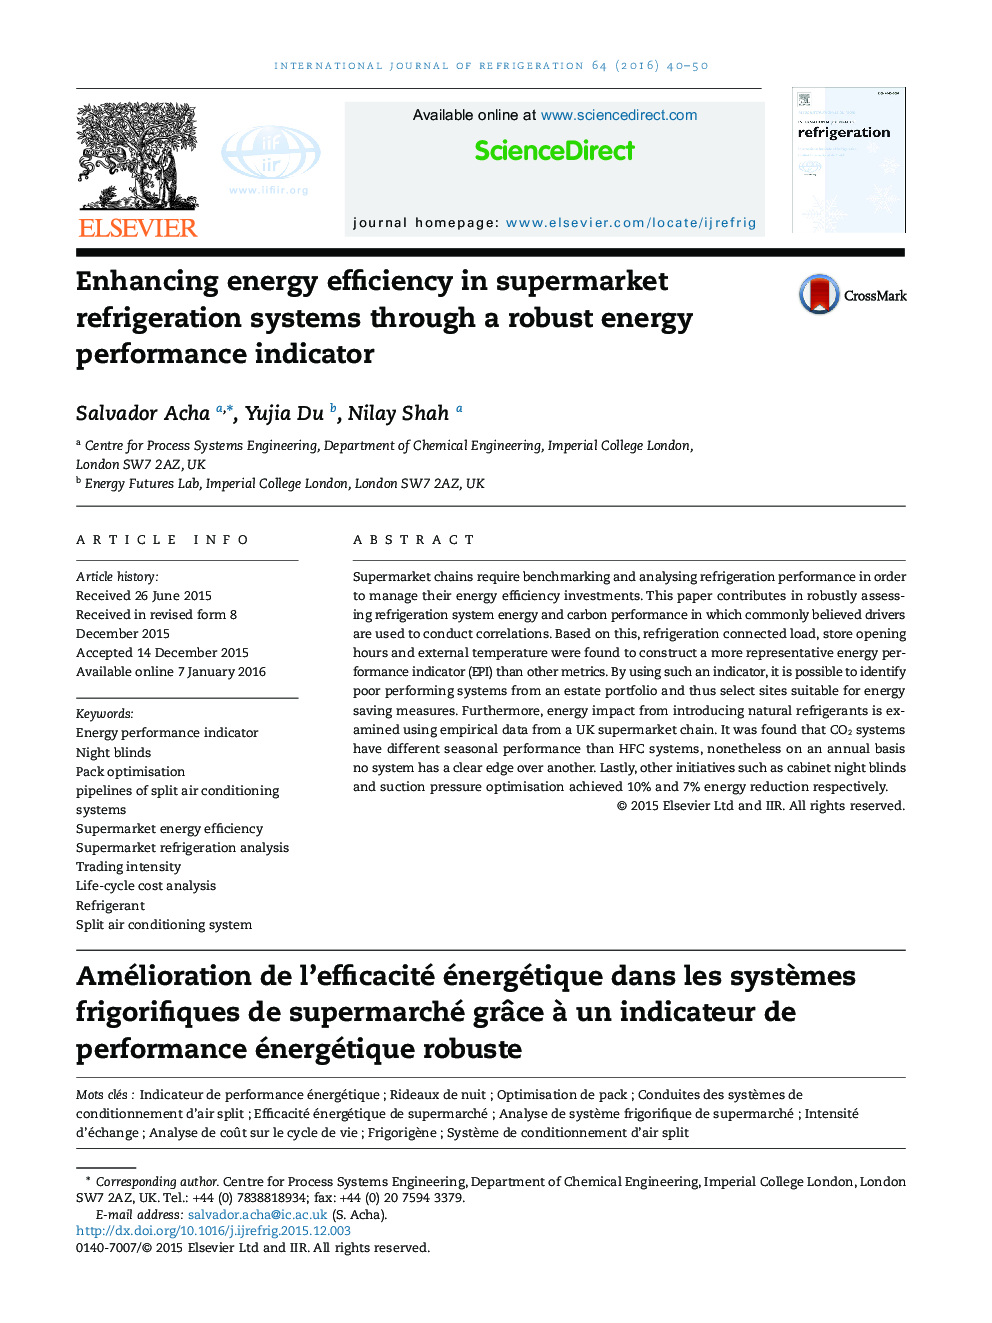 Enhancing energy efficiency in supermarket refrigeration systems through a robust energy performance indicator